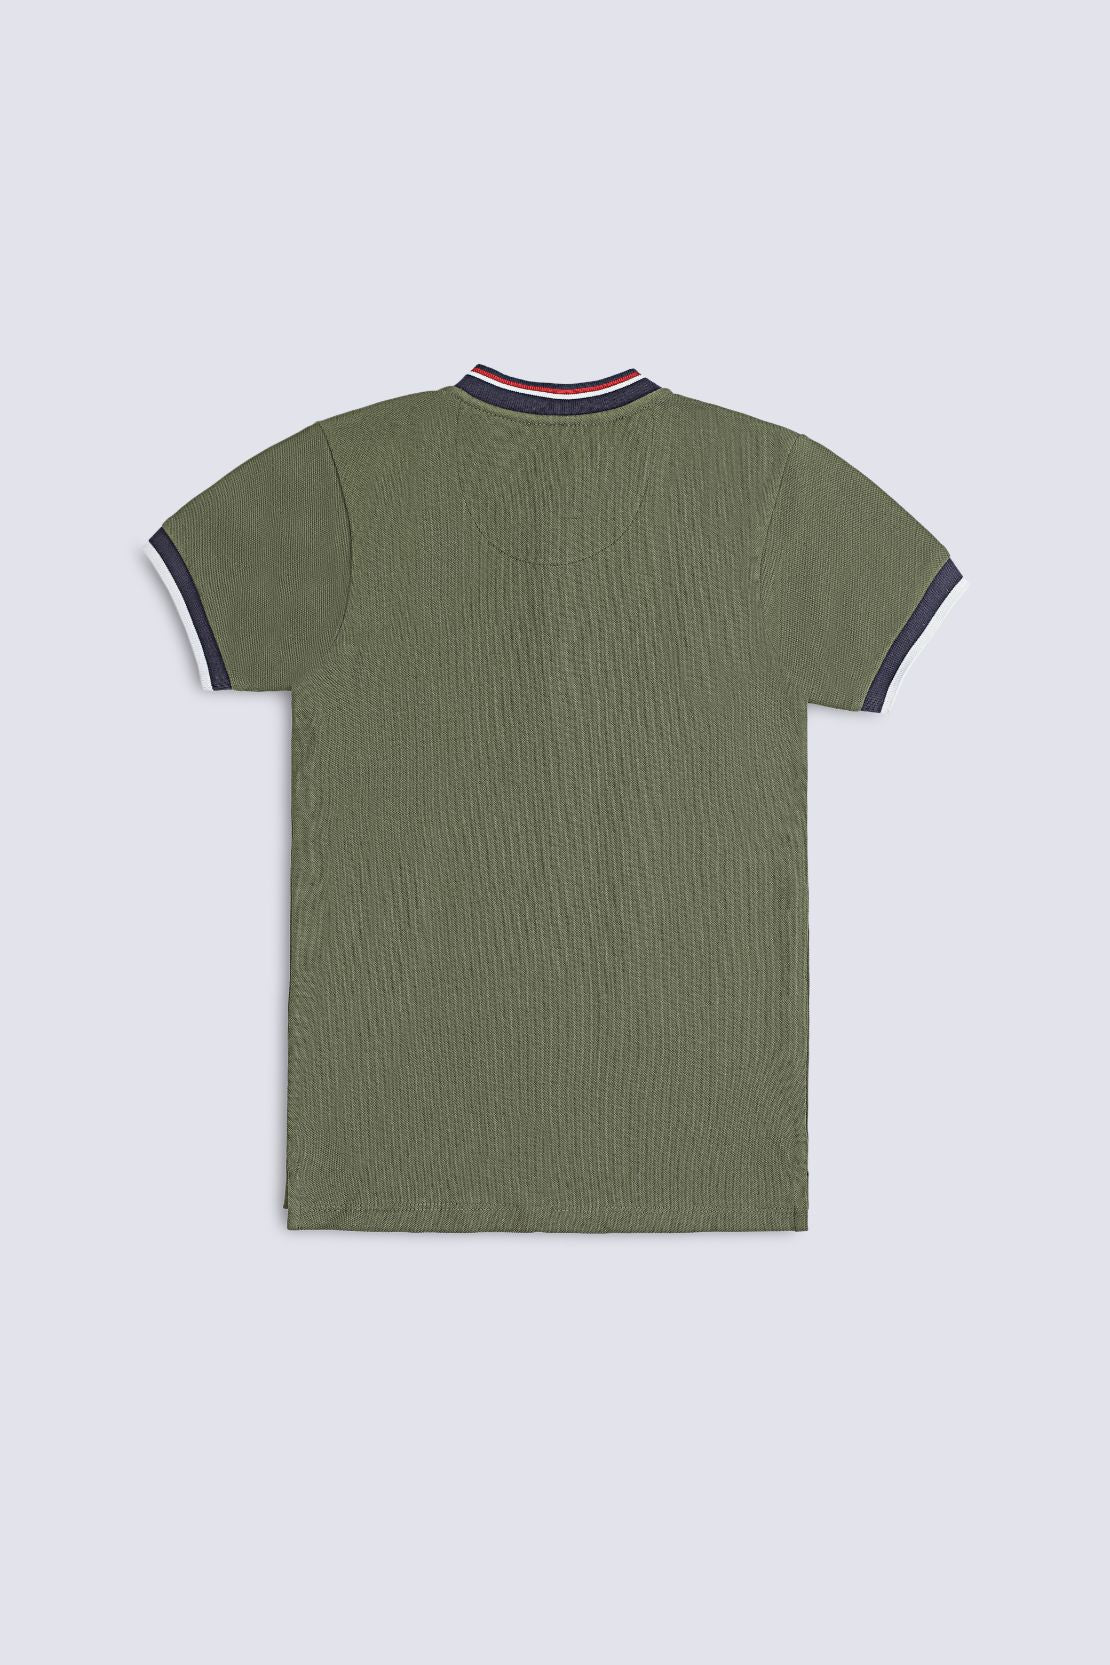 Solid Olive Polo